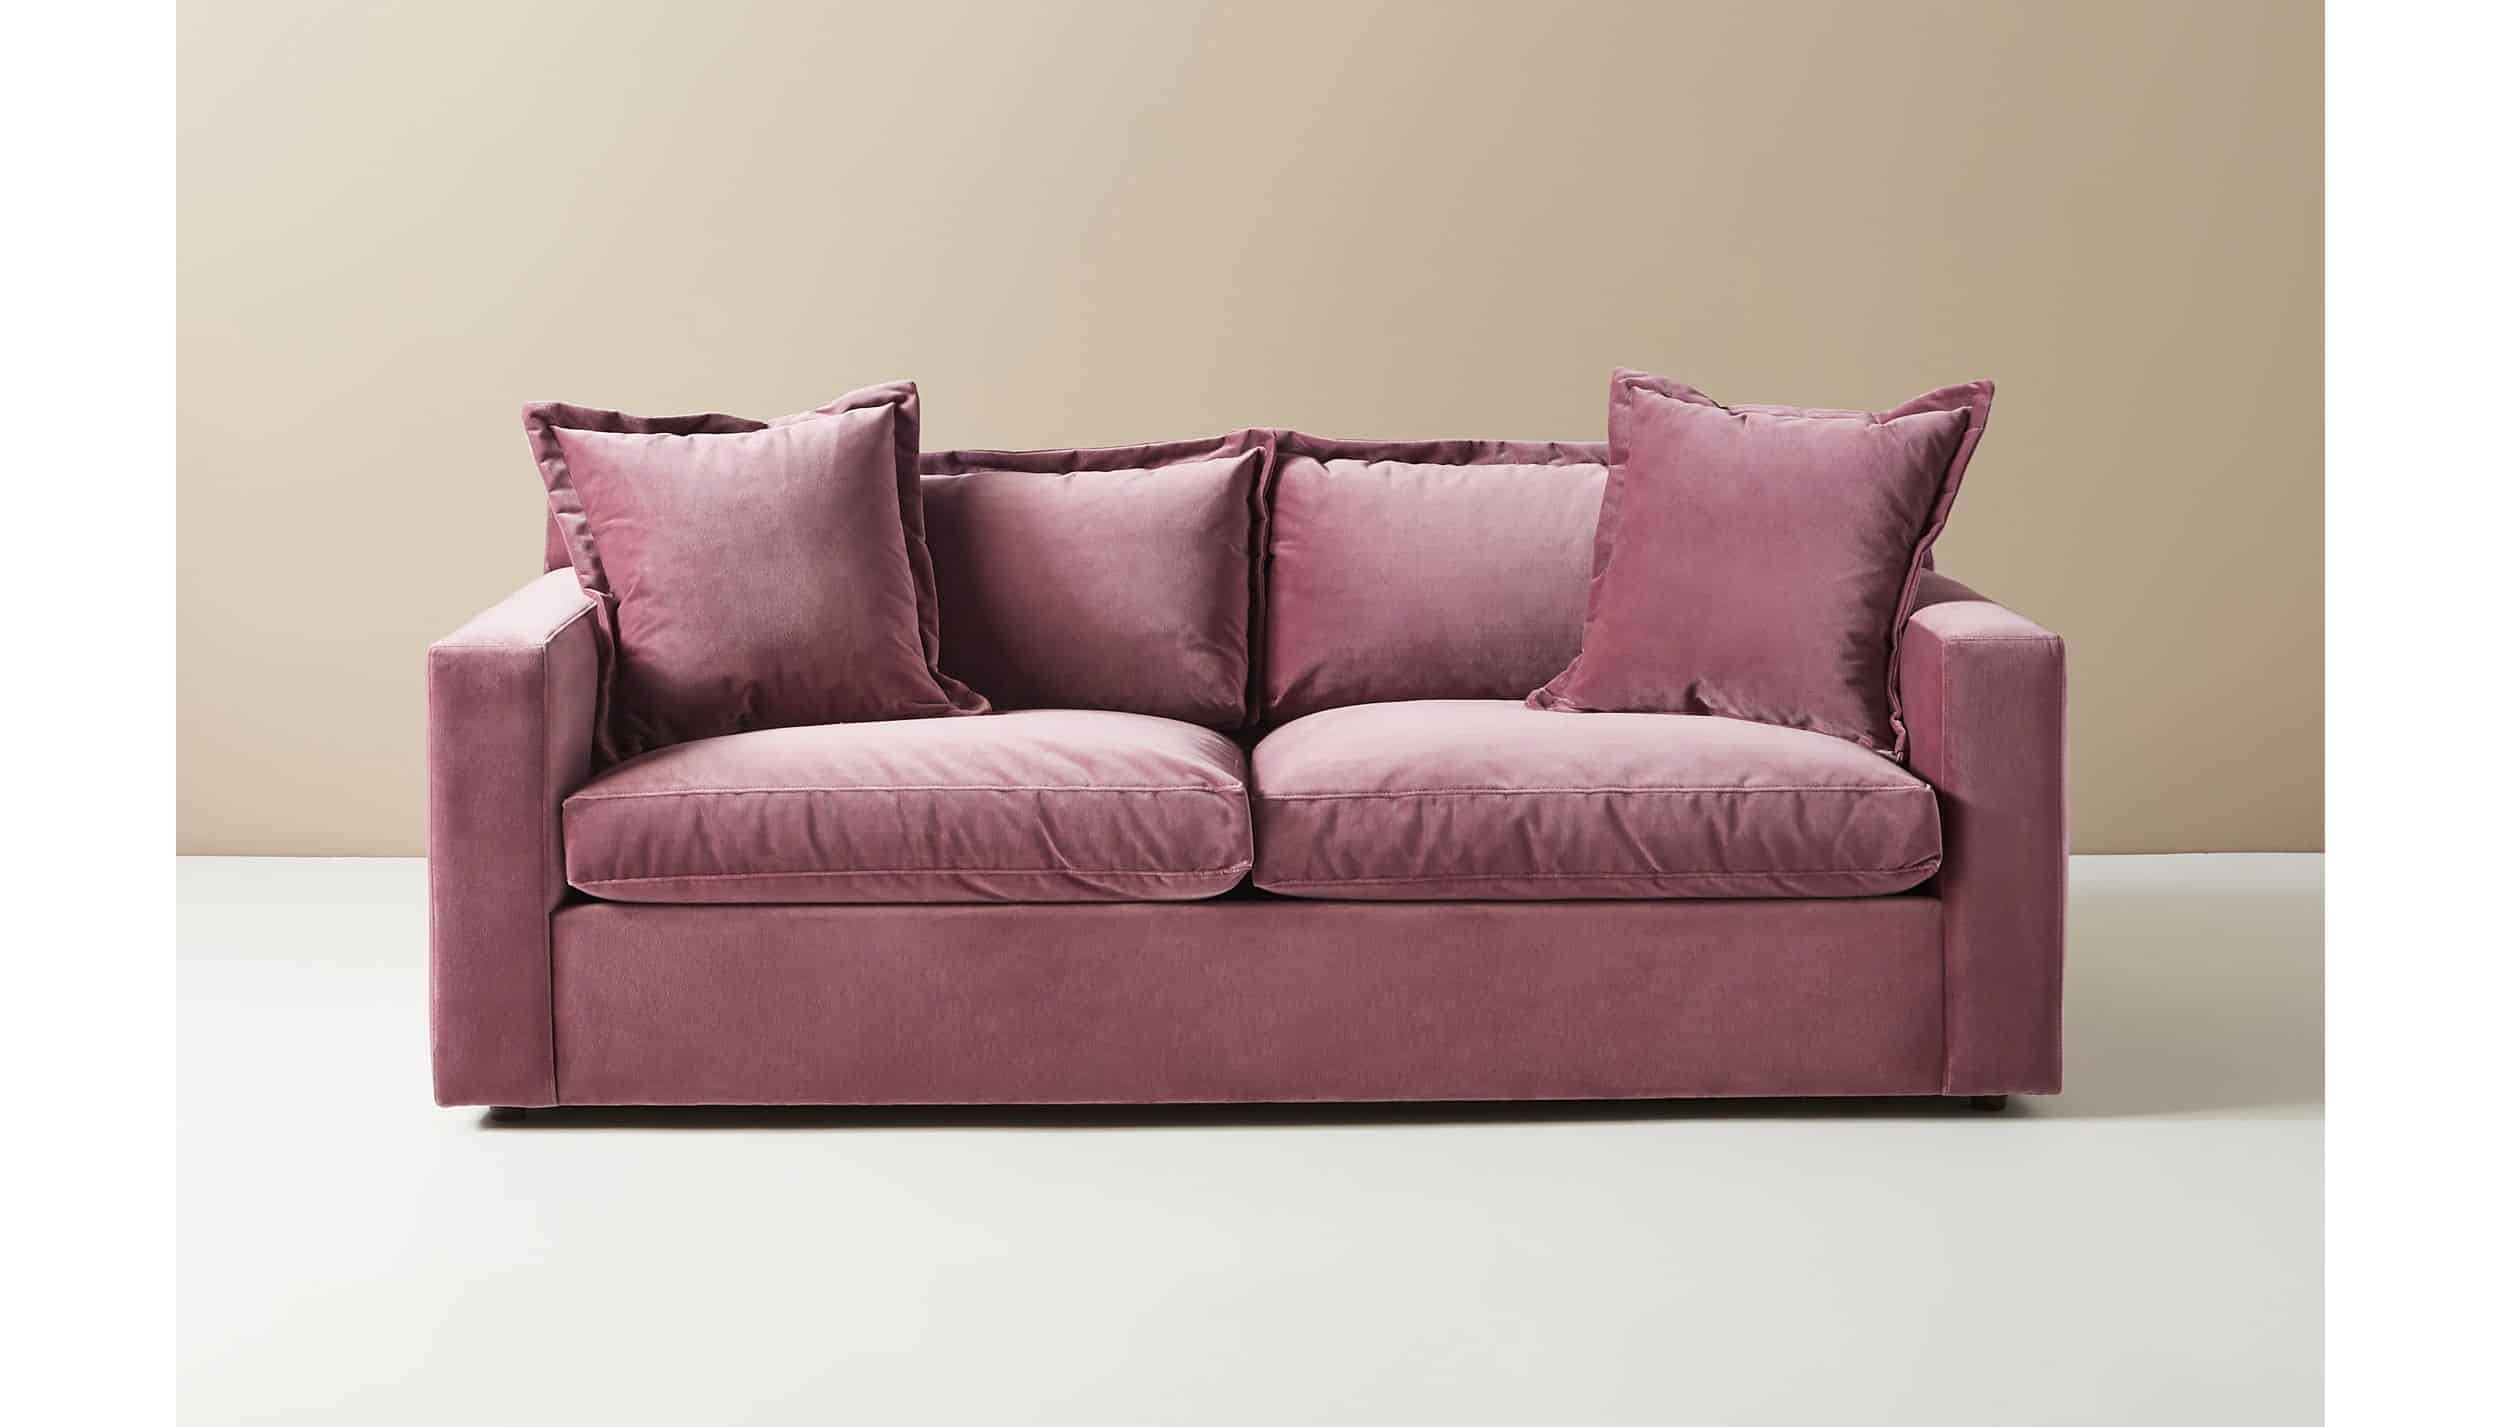 Pink Furniture Looks Exquisite With Yellow Walls